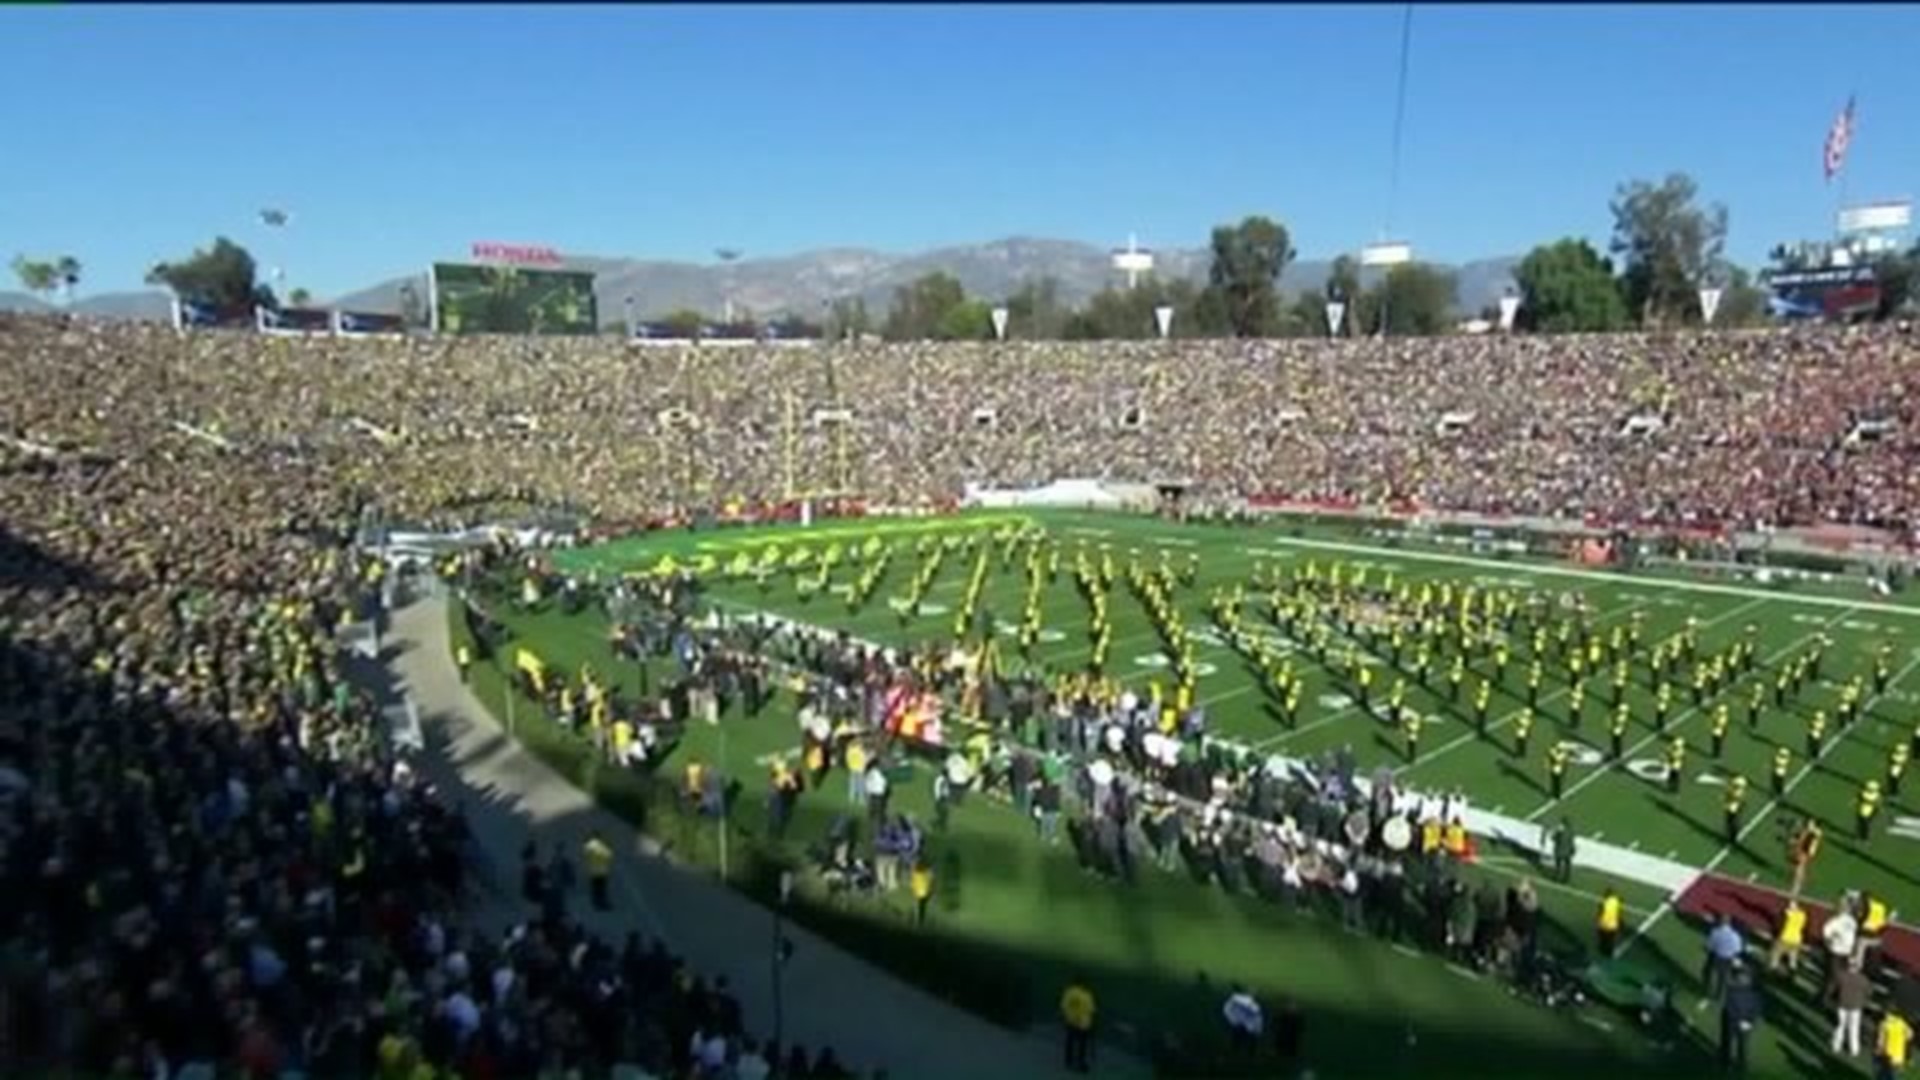 Schuylkill County Represented at Rose Bowl With Penn State Band Members